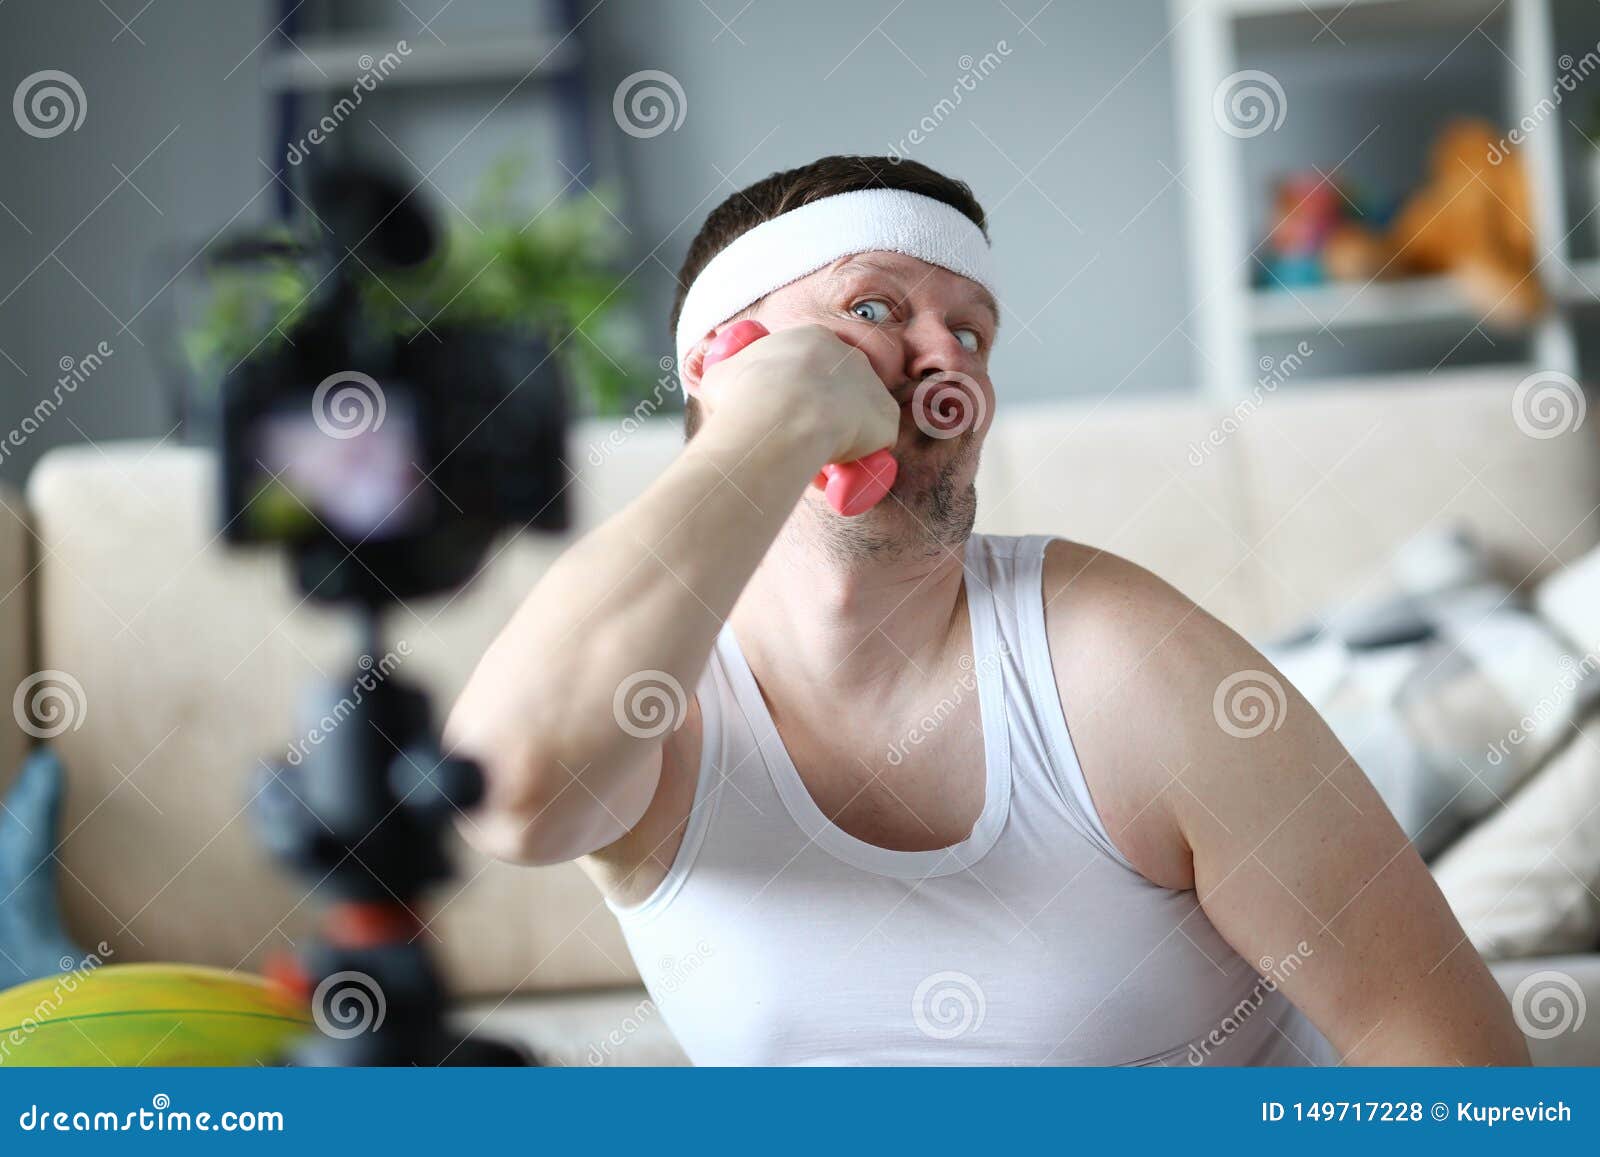 Funny Vlogger Joking and Put Dumbbell To Face Stock Photo - Image of funny,  posing: 149717228